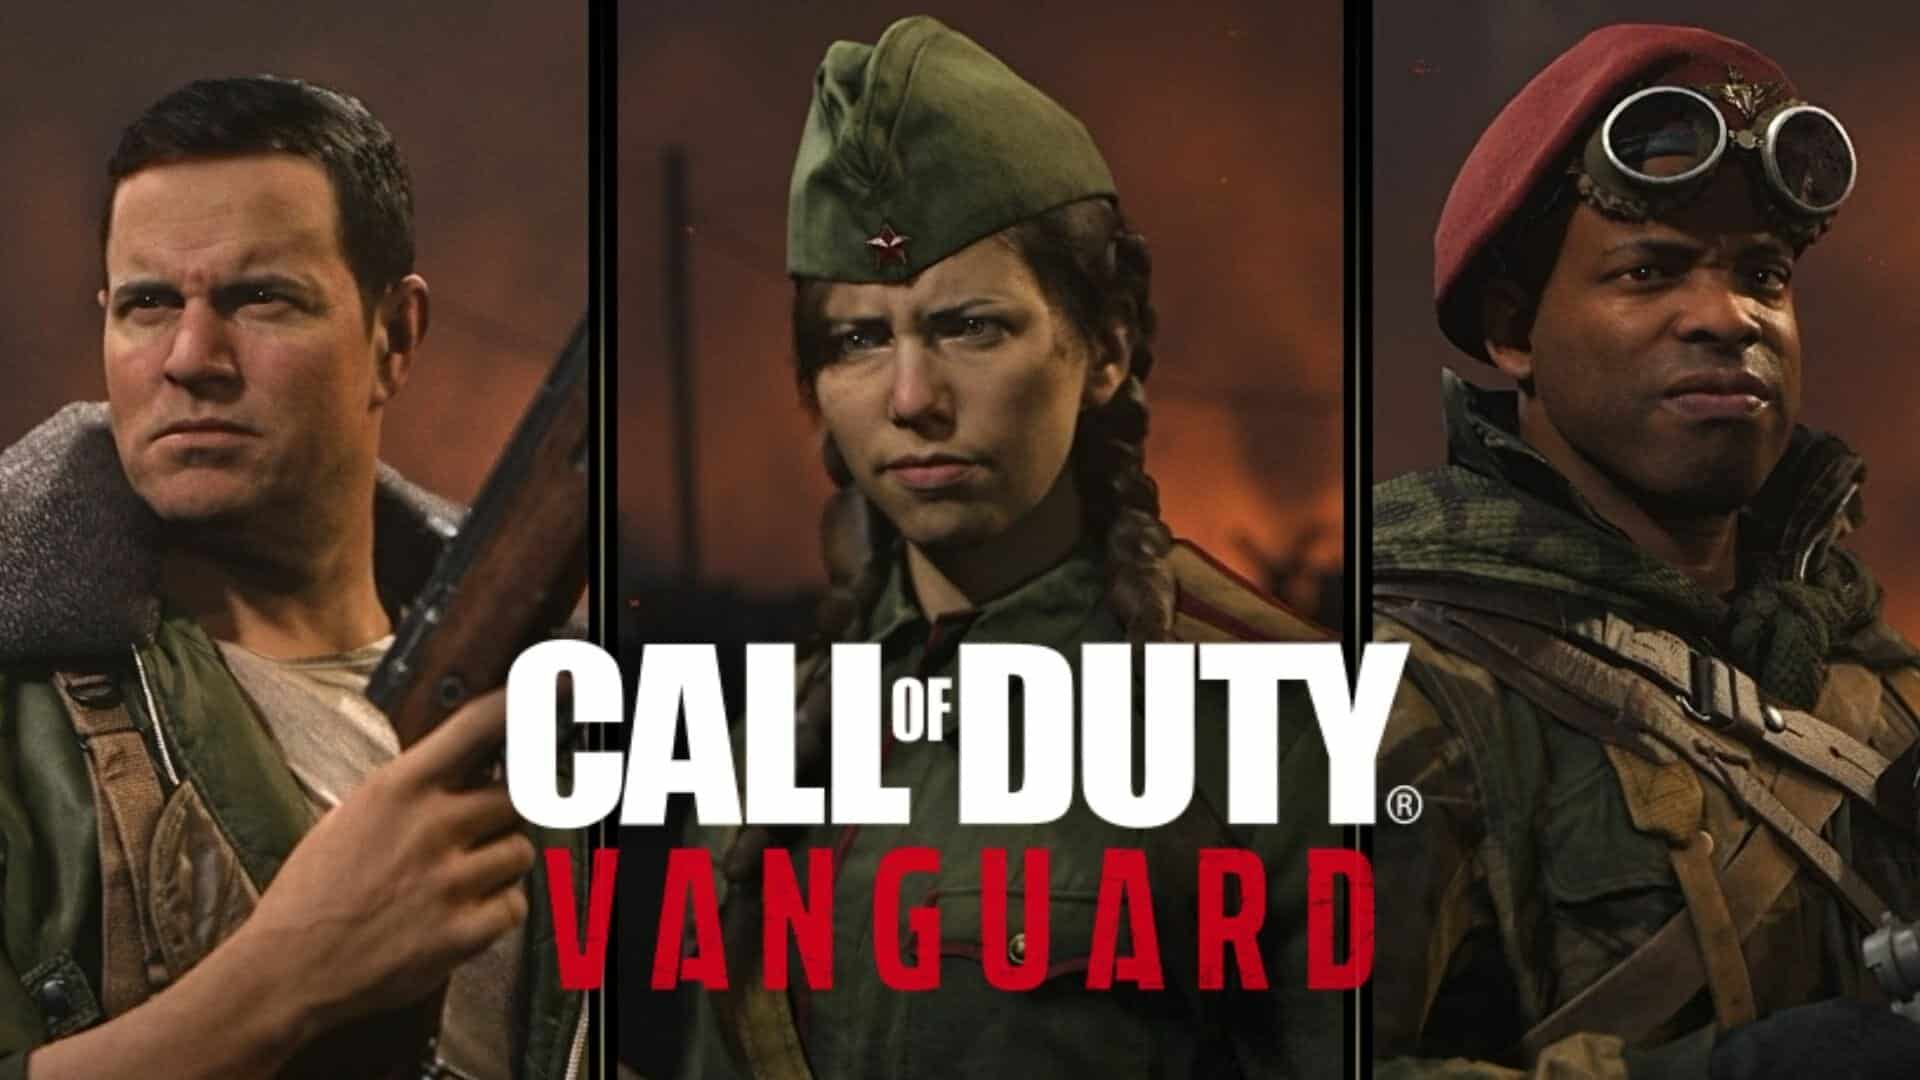 Lady Nightingale could have saved Call of Duty: Vanguard from